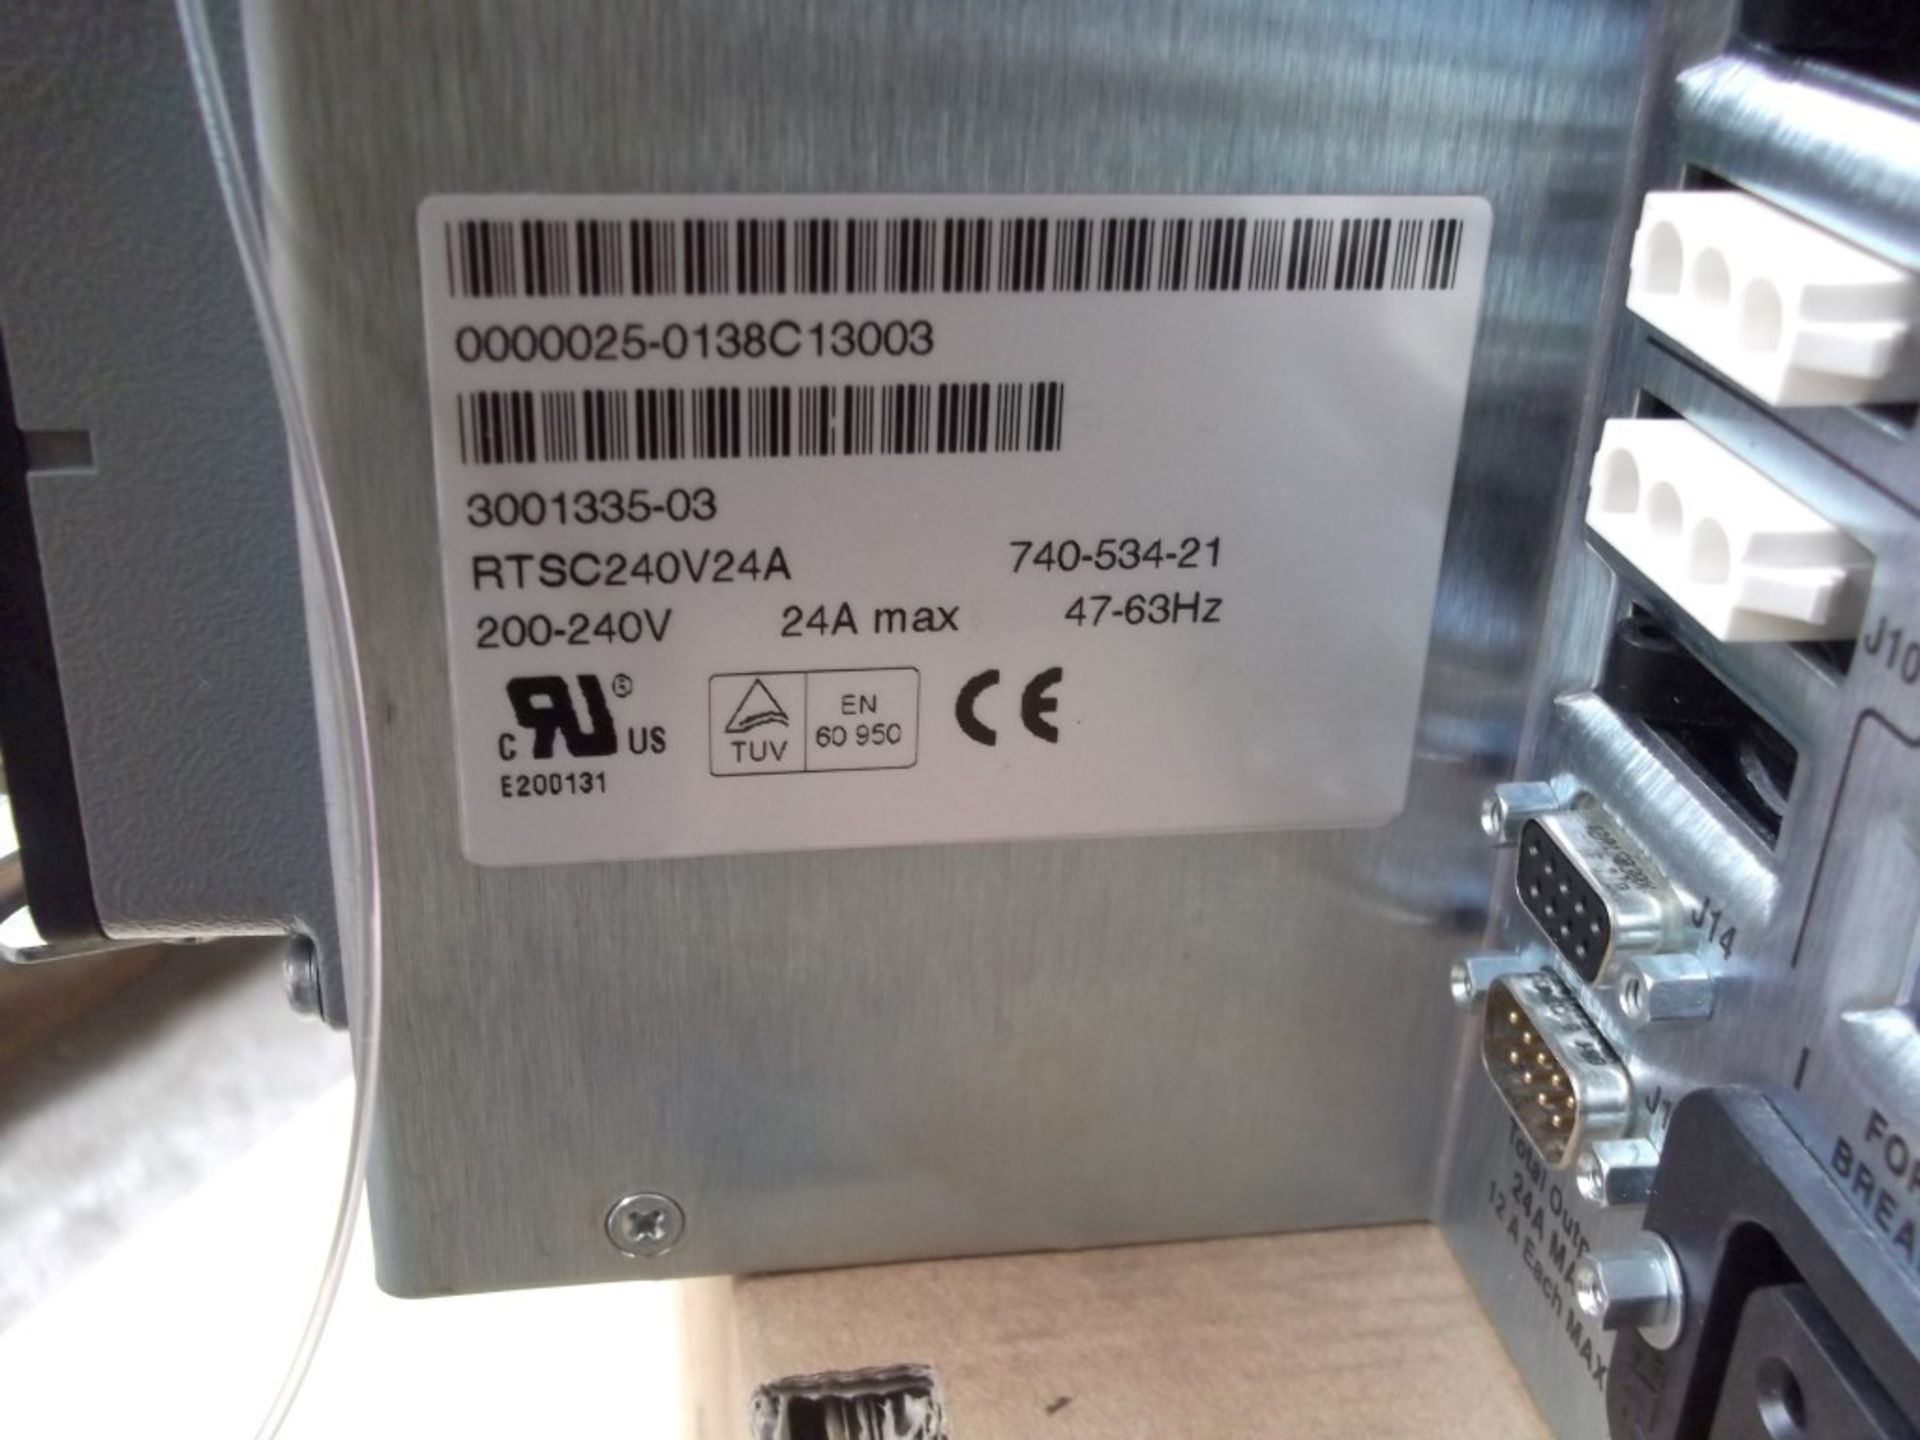 1 x Sun Redundant Transfer Switch - 3001335-05 RTSC240V24A - Ref NSB018 - Recently Removed From A - Image 4 of 4